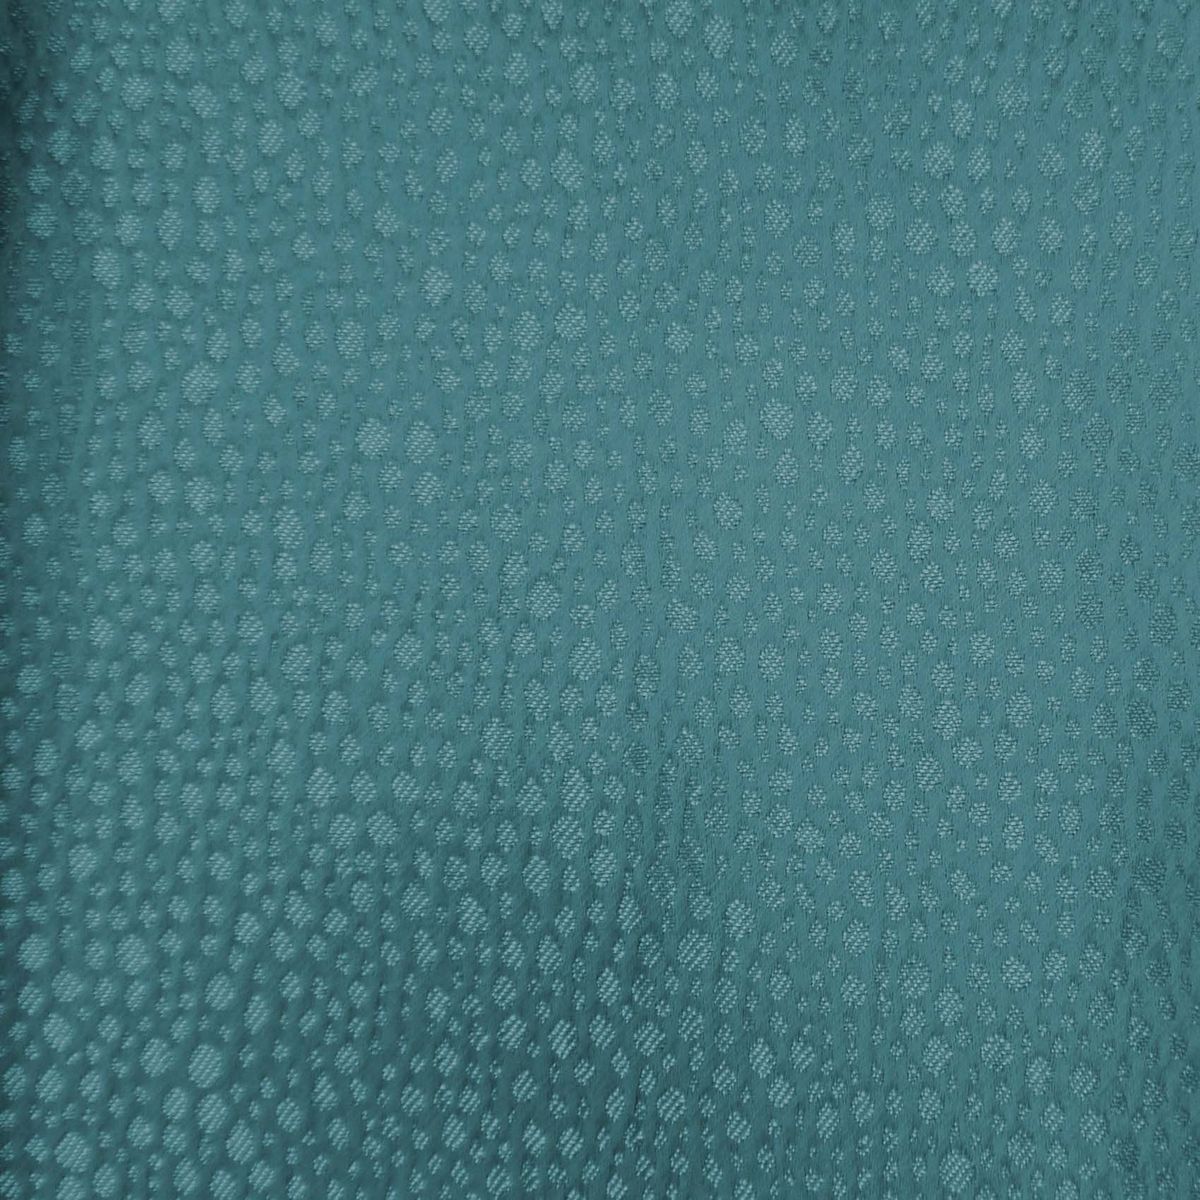 Sereno Teal Fabric by Voyage Maison